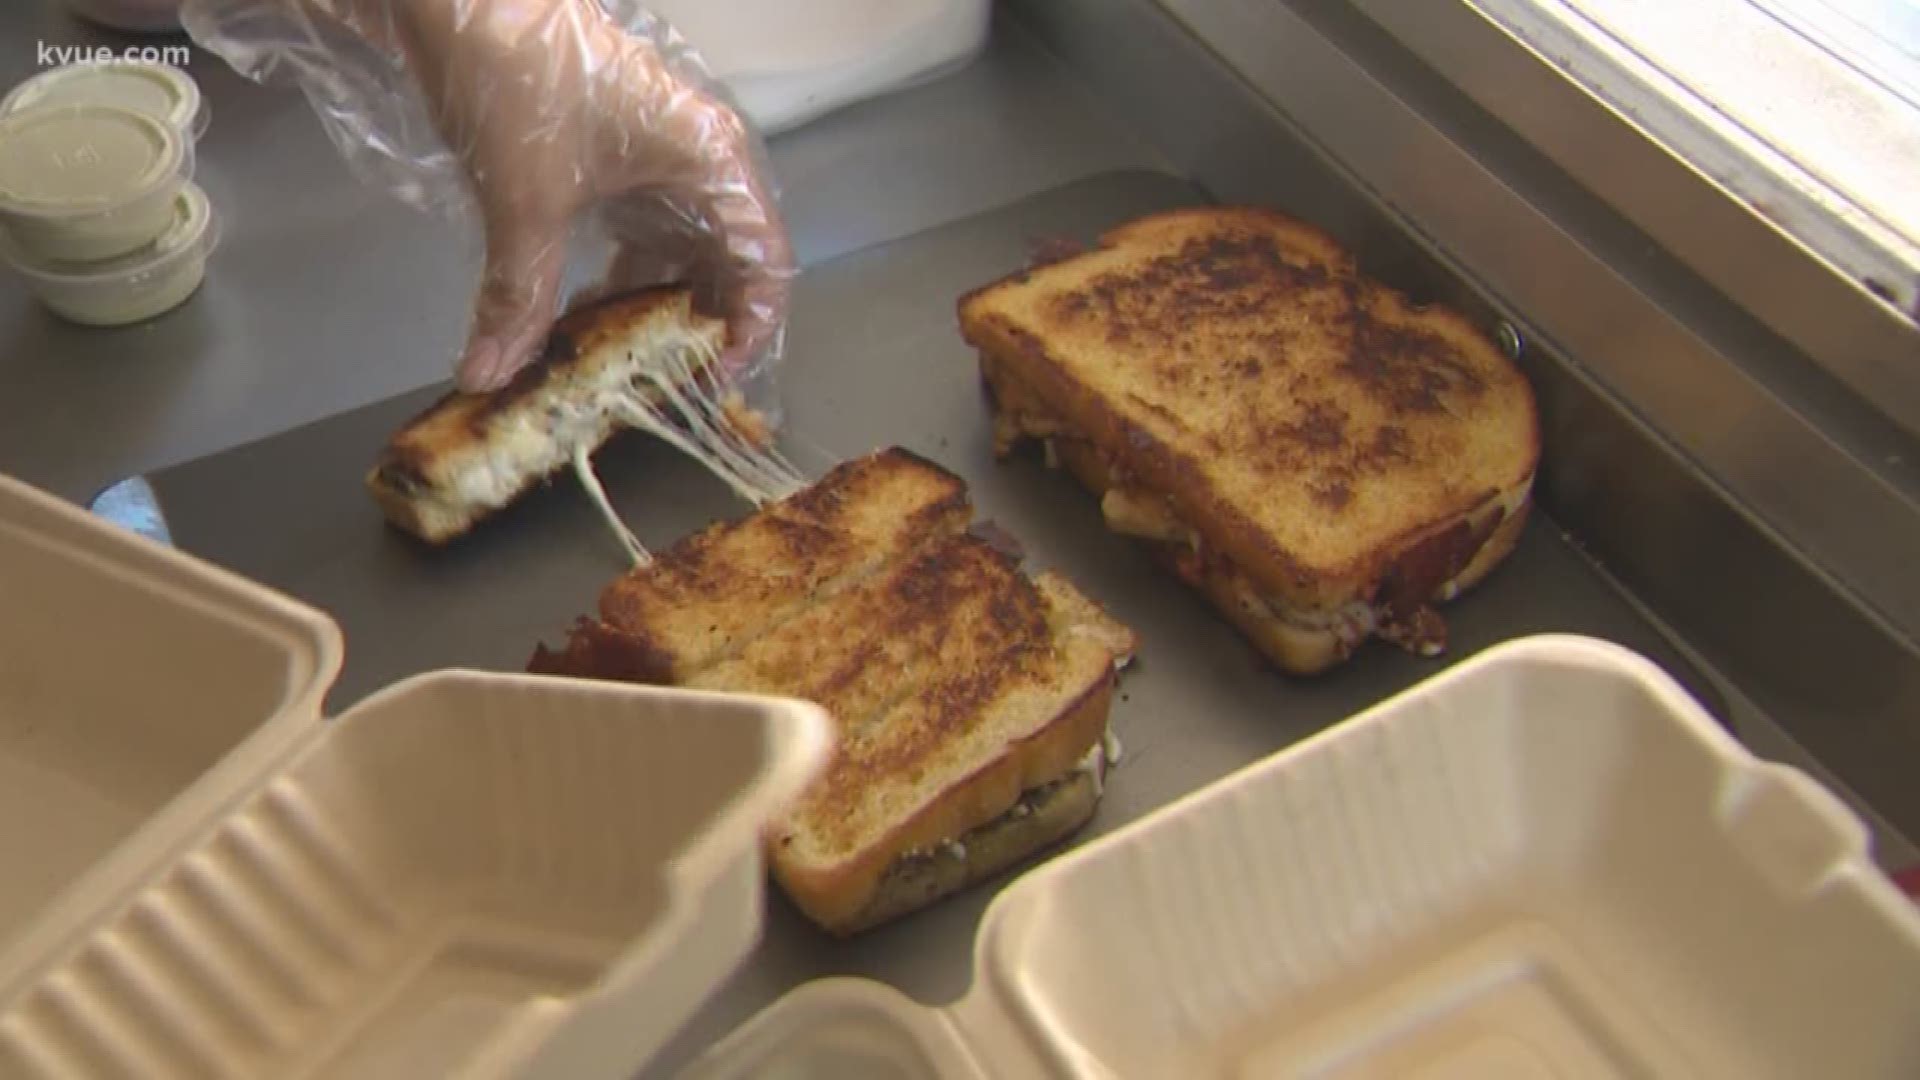 One of the many food trucks in Austin features food that most of us remember loving as kids. It turns out grilled cheese sandwiches aren't just for the little ones anymore.